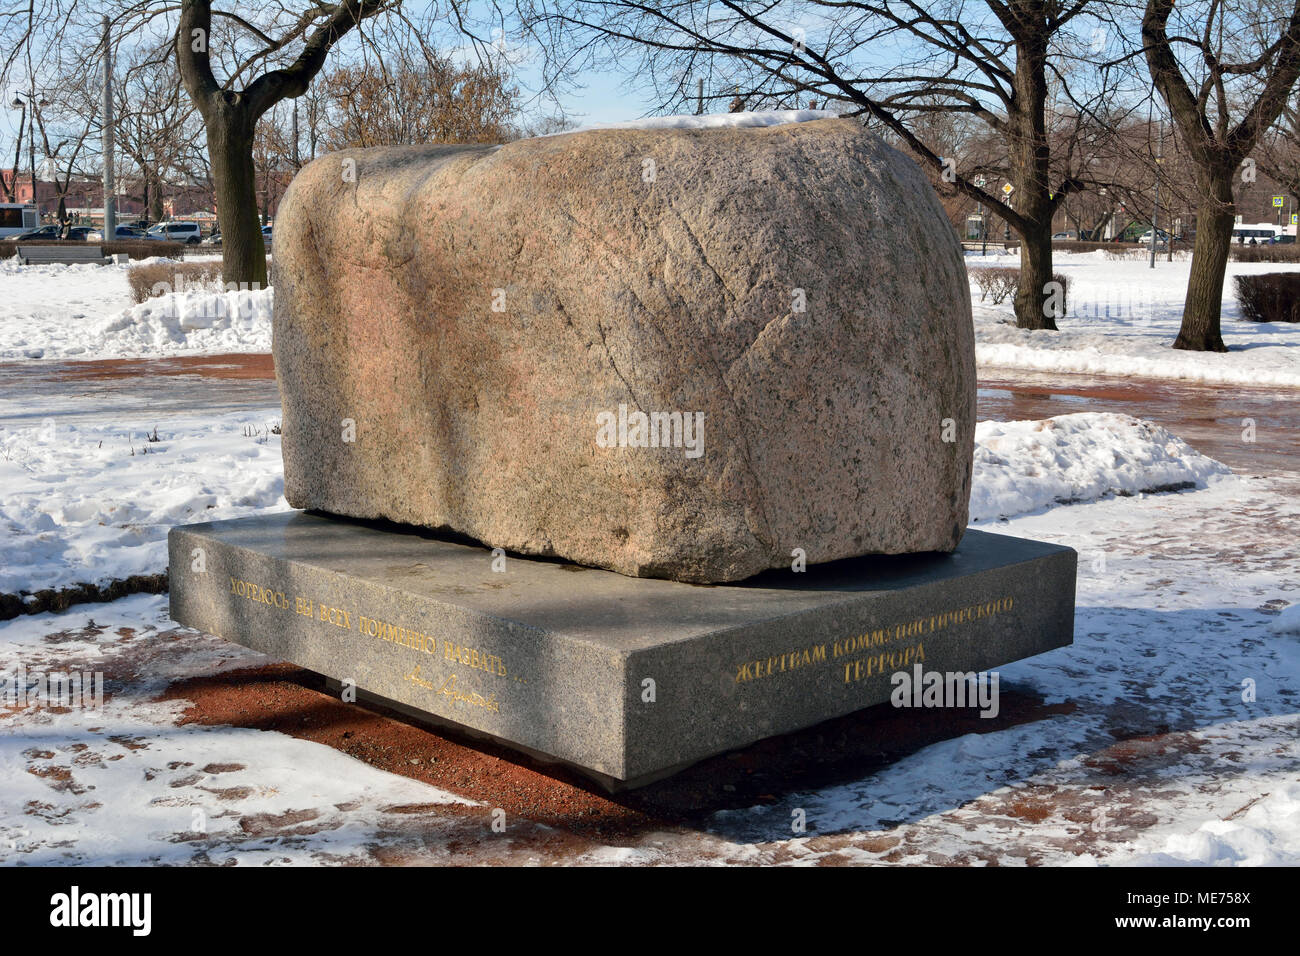 St Petersburg, Russia - March 27, 2018. Monument to the Victims of Communist Terror in St Petersburg. Stock Photo